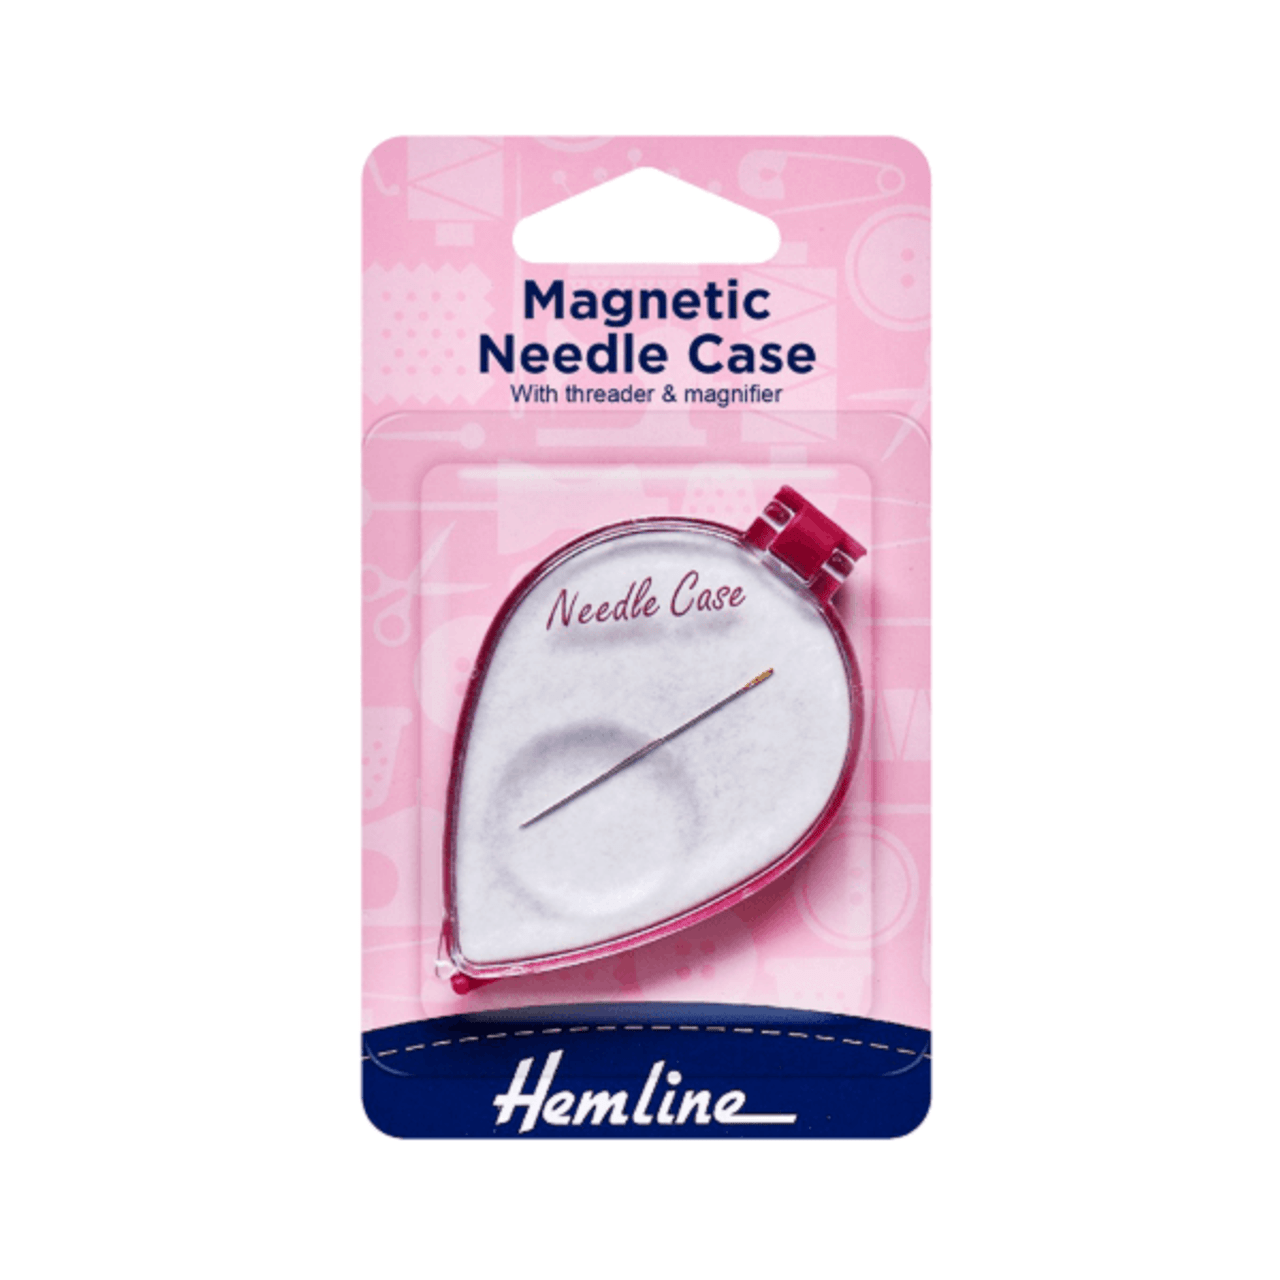 Hemline Magnetic Needle Case with Threader & Magnifier in package